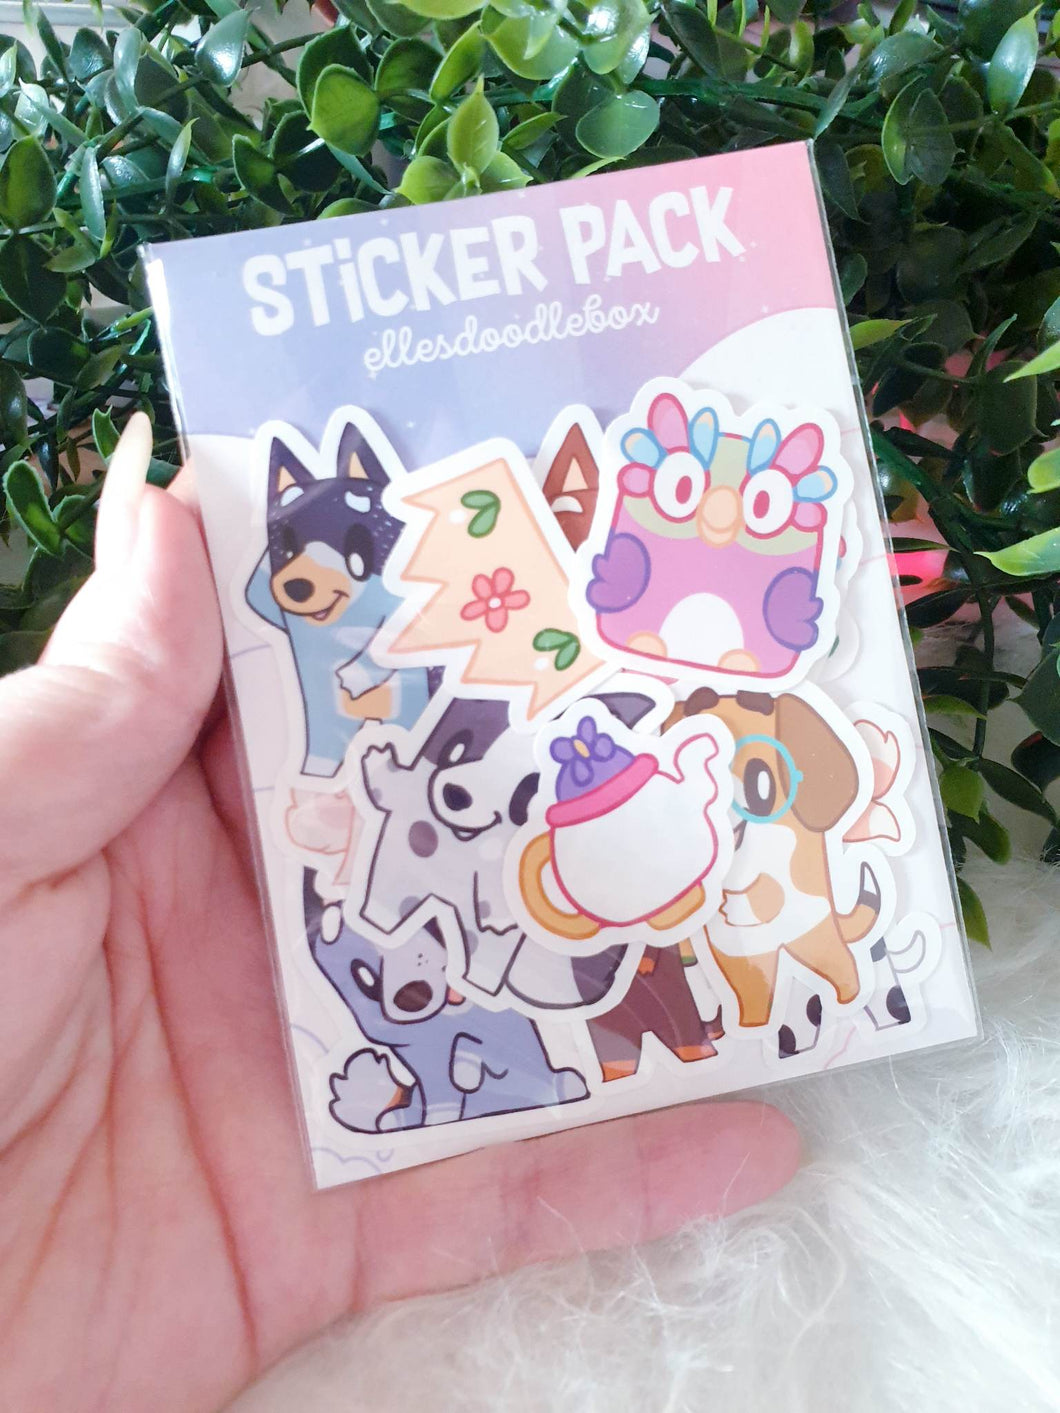 Blue dog and friends Sticker Pack